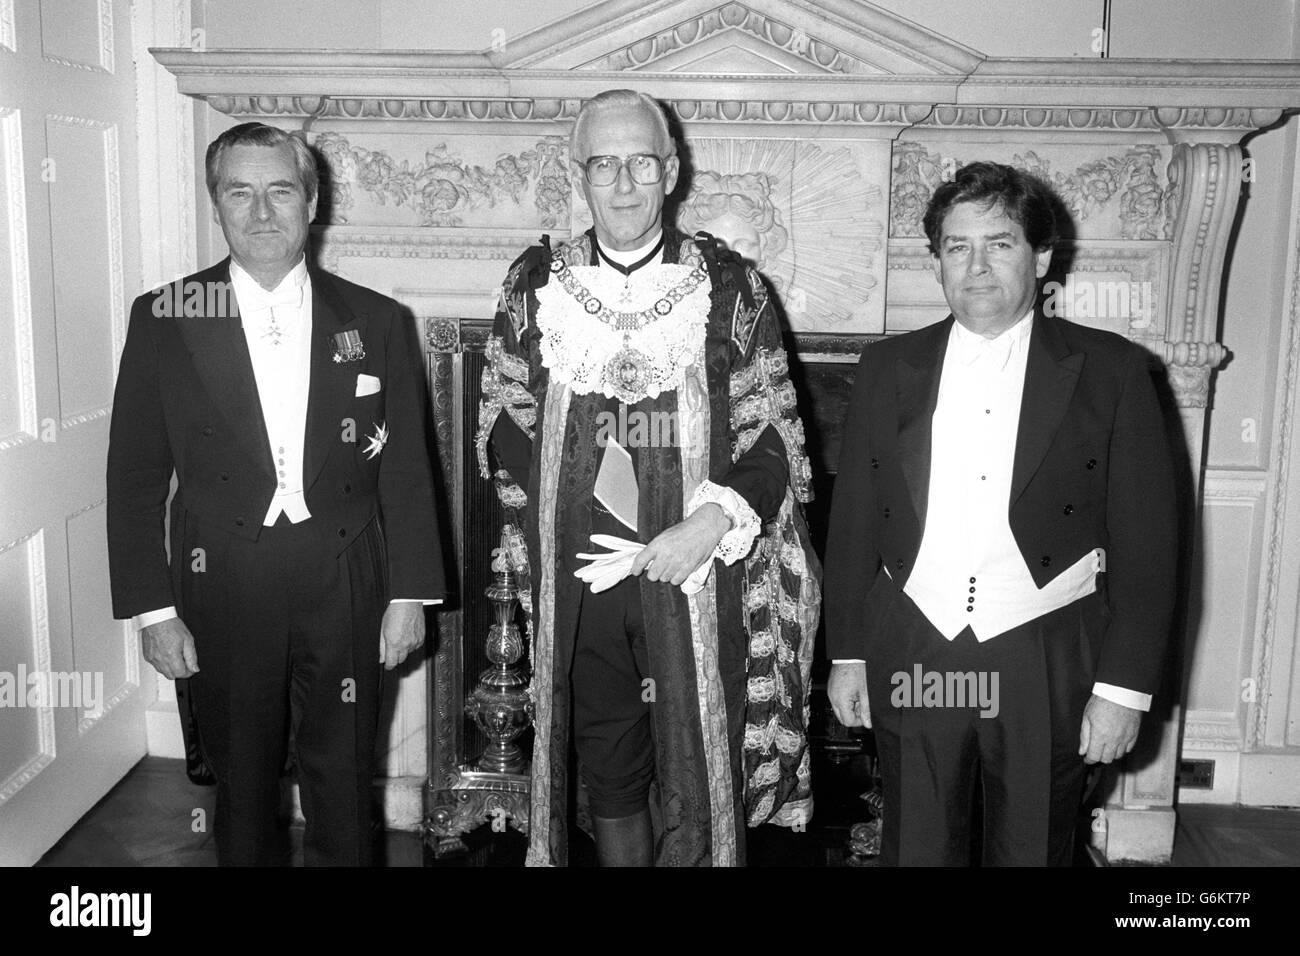 The Lord Mayor of London, Sir David Rowe-Ham (centre), with the Chancellor of the Exchequer Nigel Lawson (right) and the governor of the Bank of England Robin Leigh-Pemberton. They were at the Mansion House in London for the Lord Mayor's Banquet for Bankers and Merchants. Stock Photo